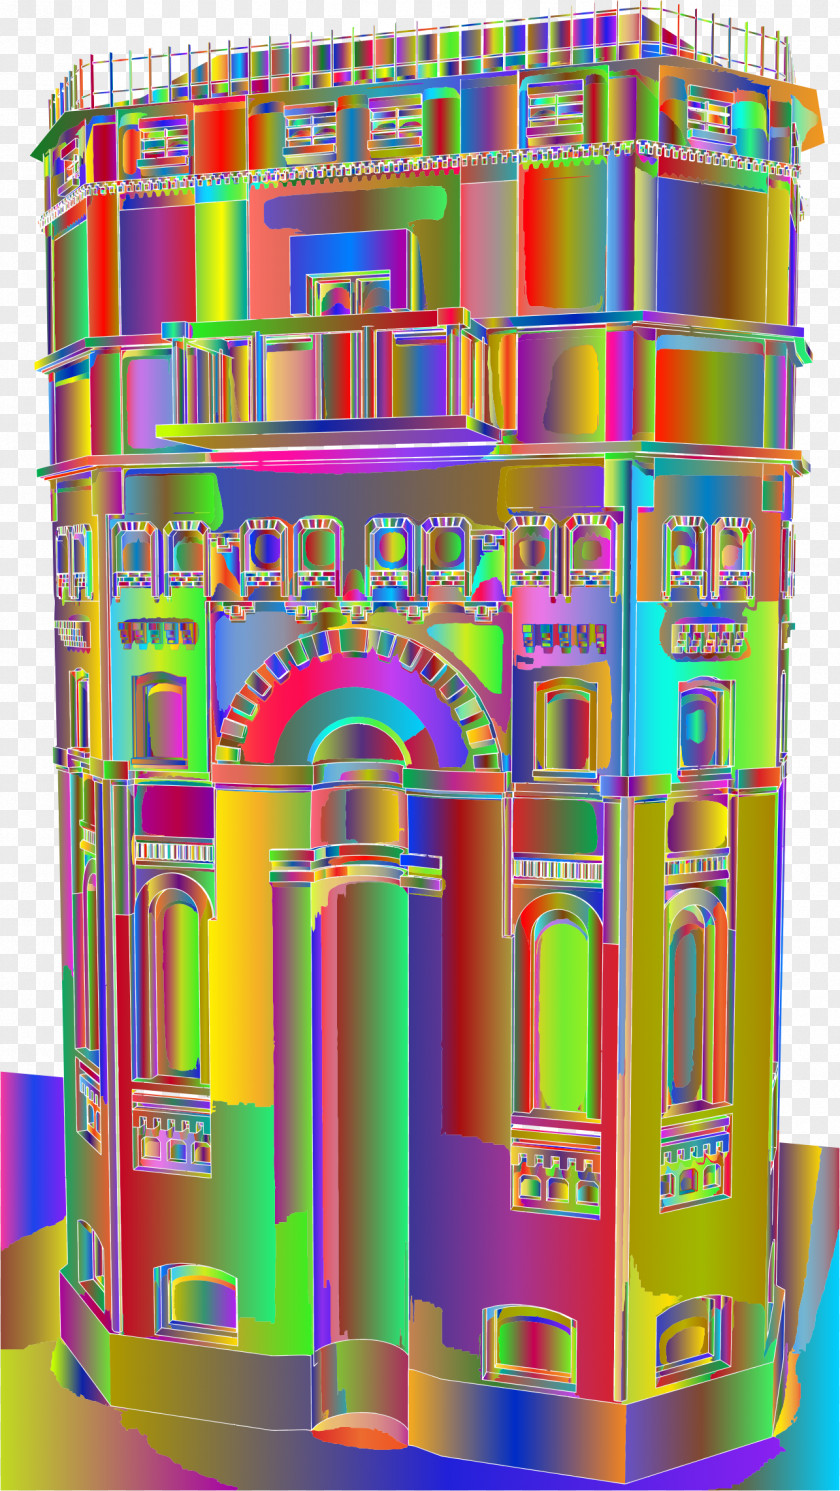 Old Water Tower Chicago Openclipart Clip Art Remix Image PNG